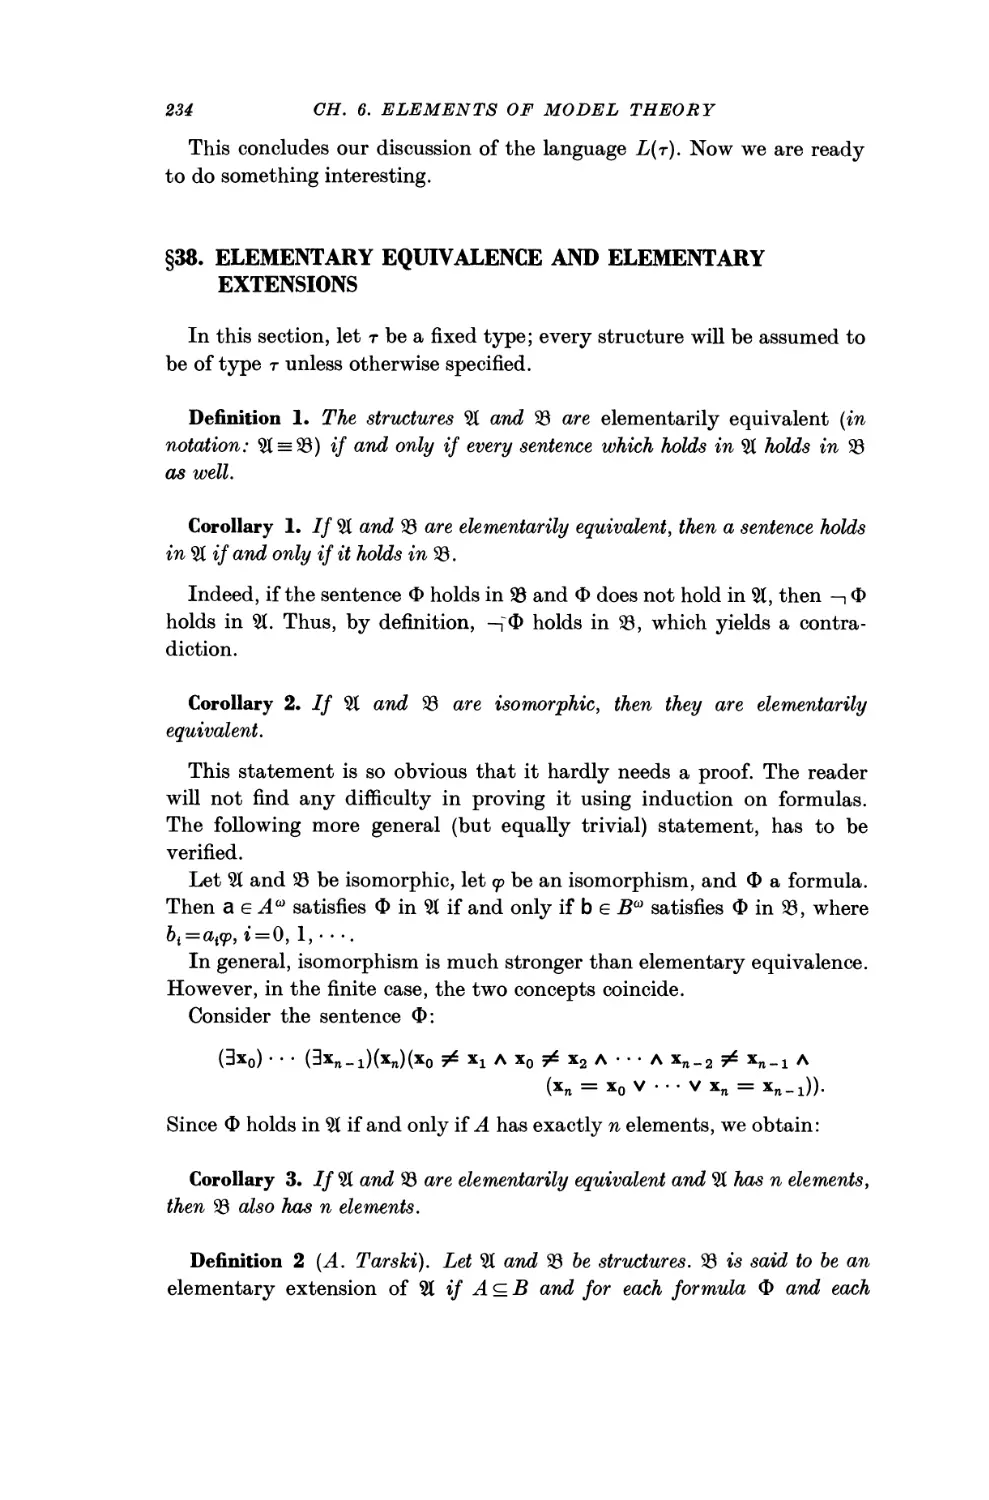 §38. Elementary Equivalence and Elementary Extensions